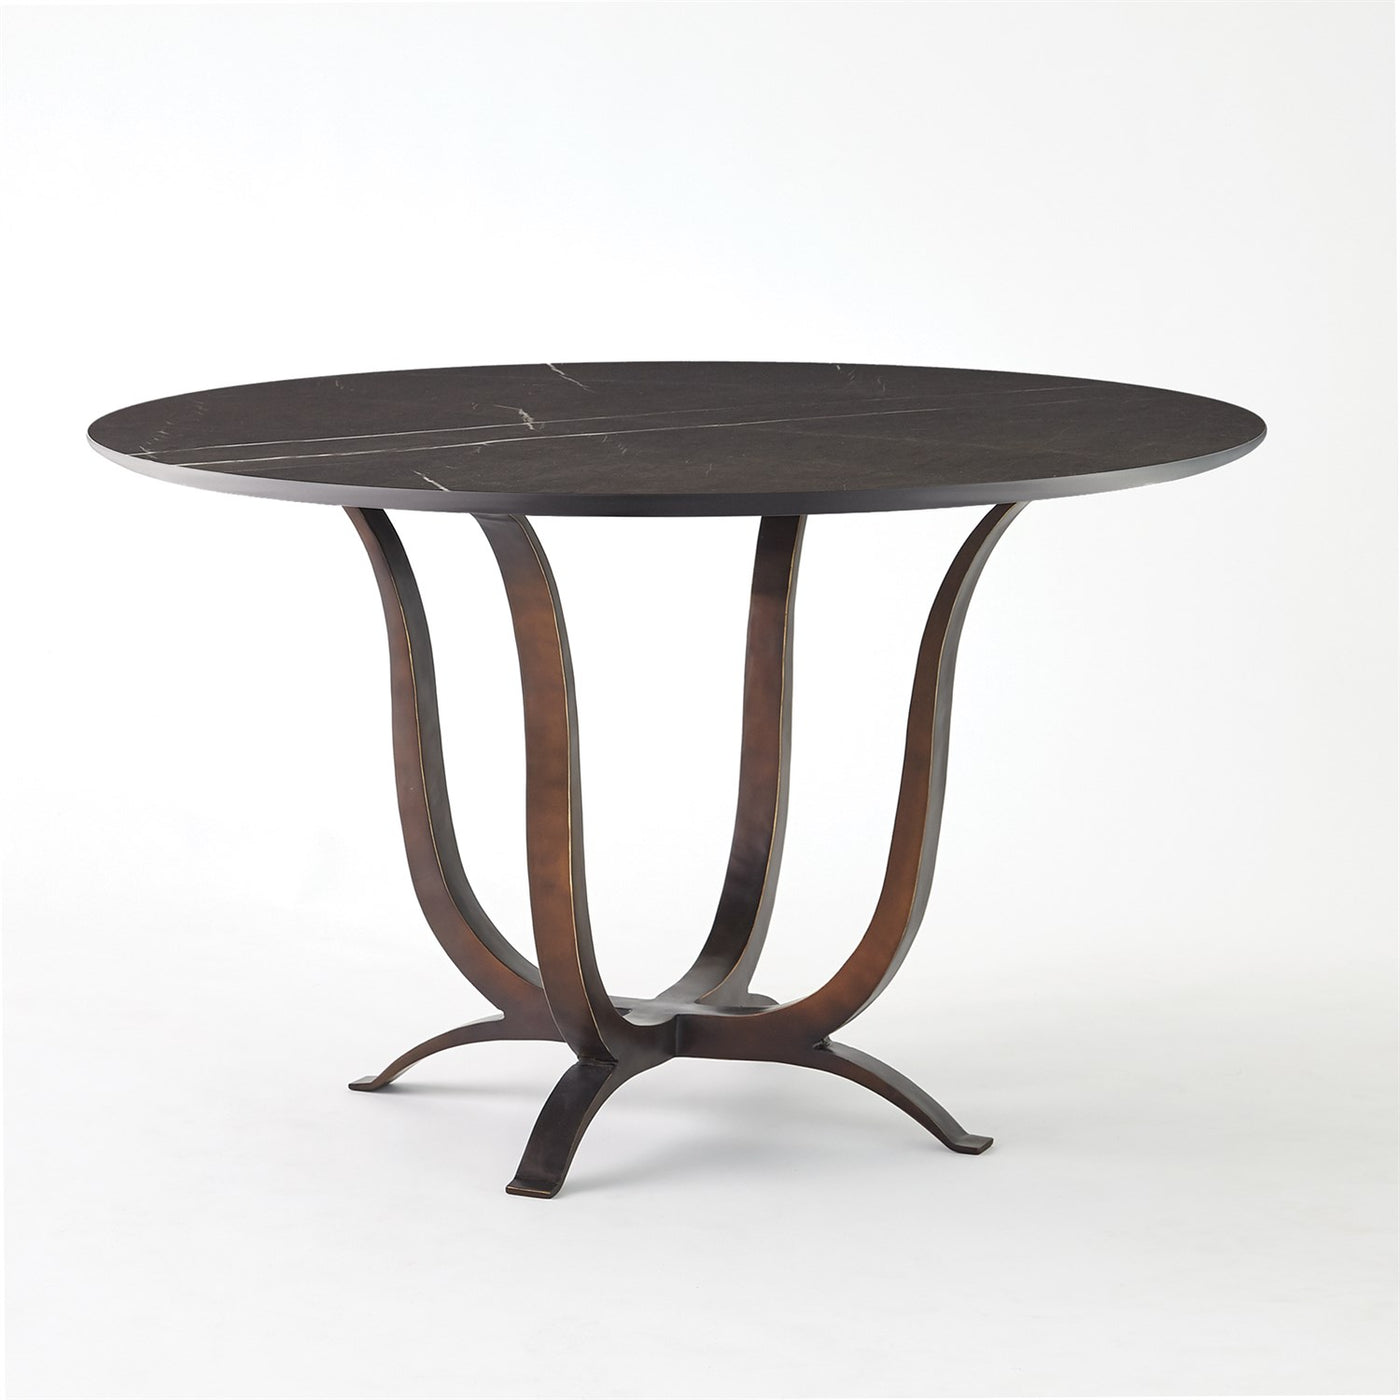 CHORDA DINING TABLE-BRONZE-48" by Global Views